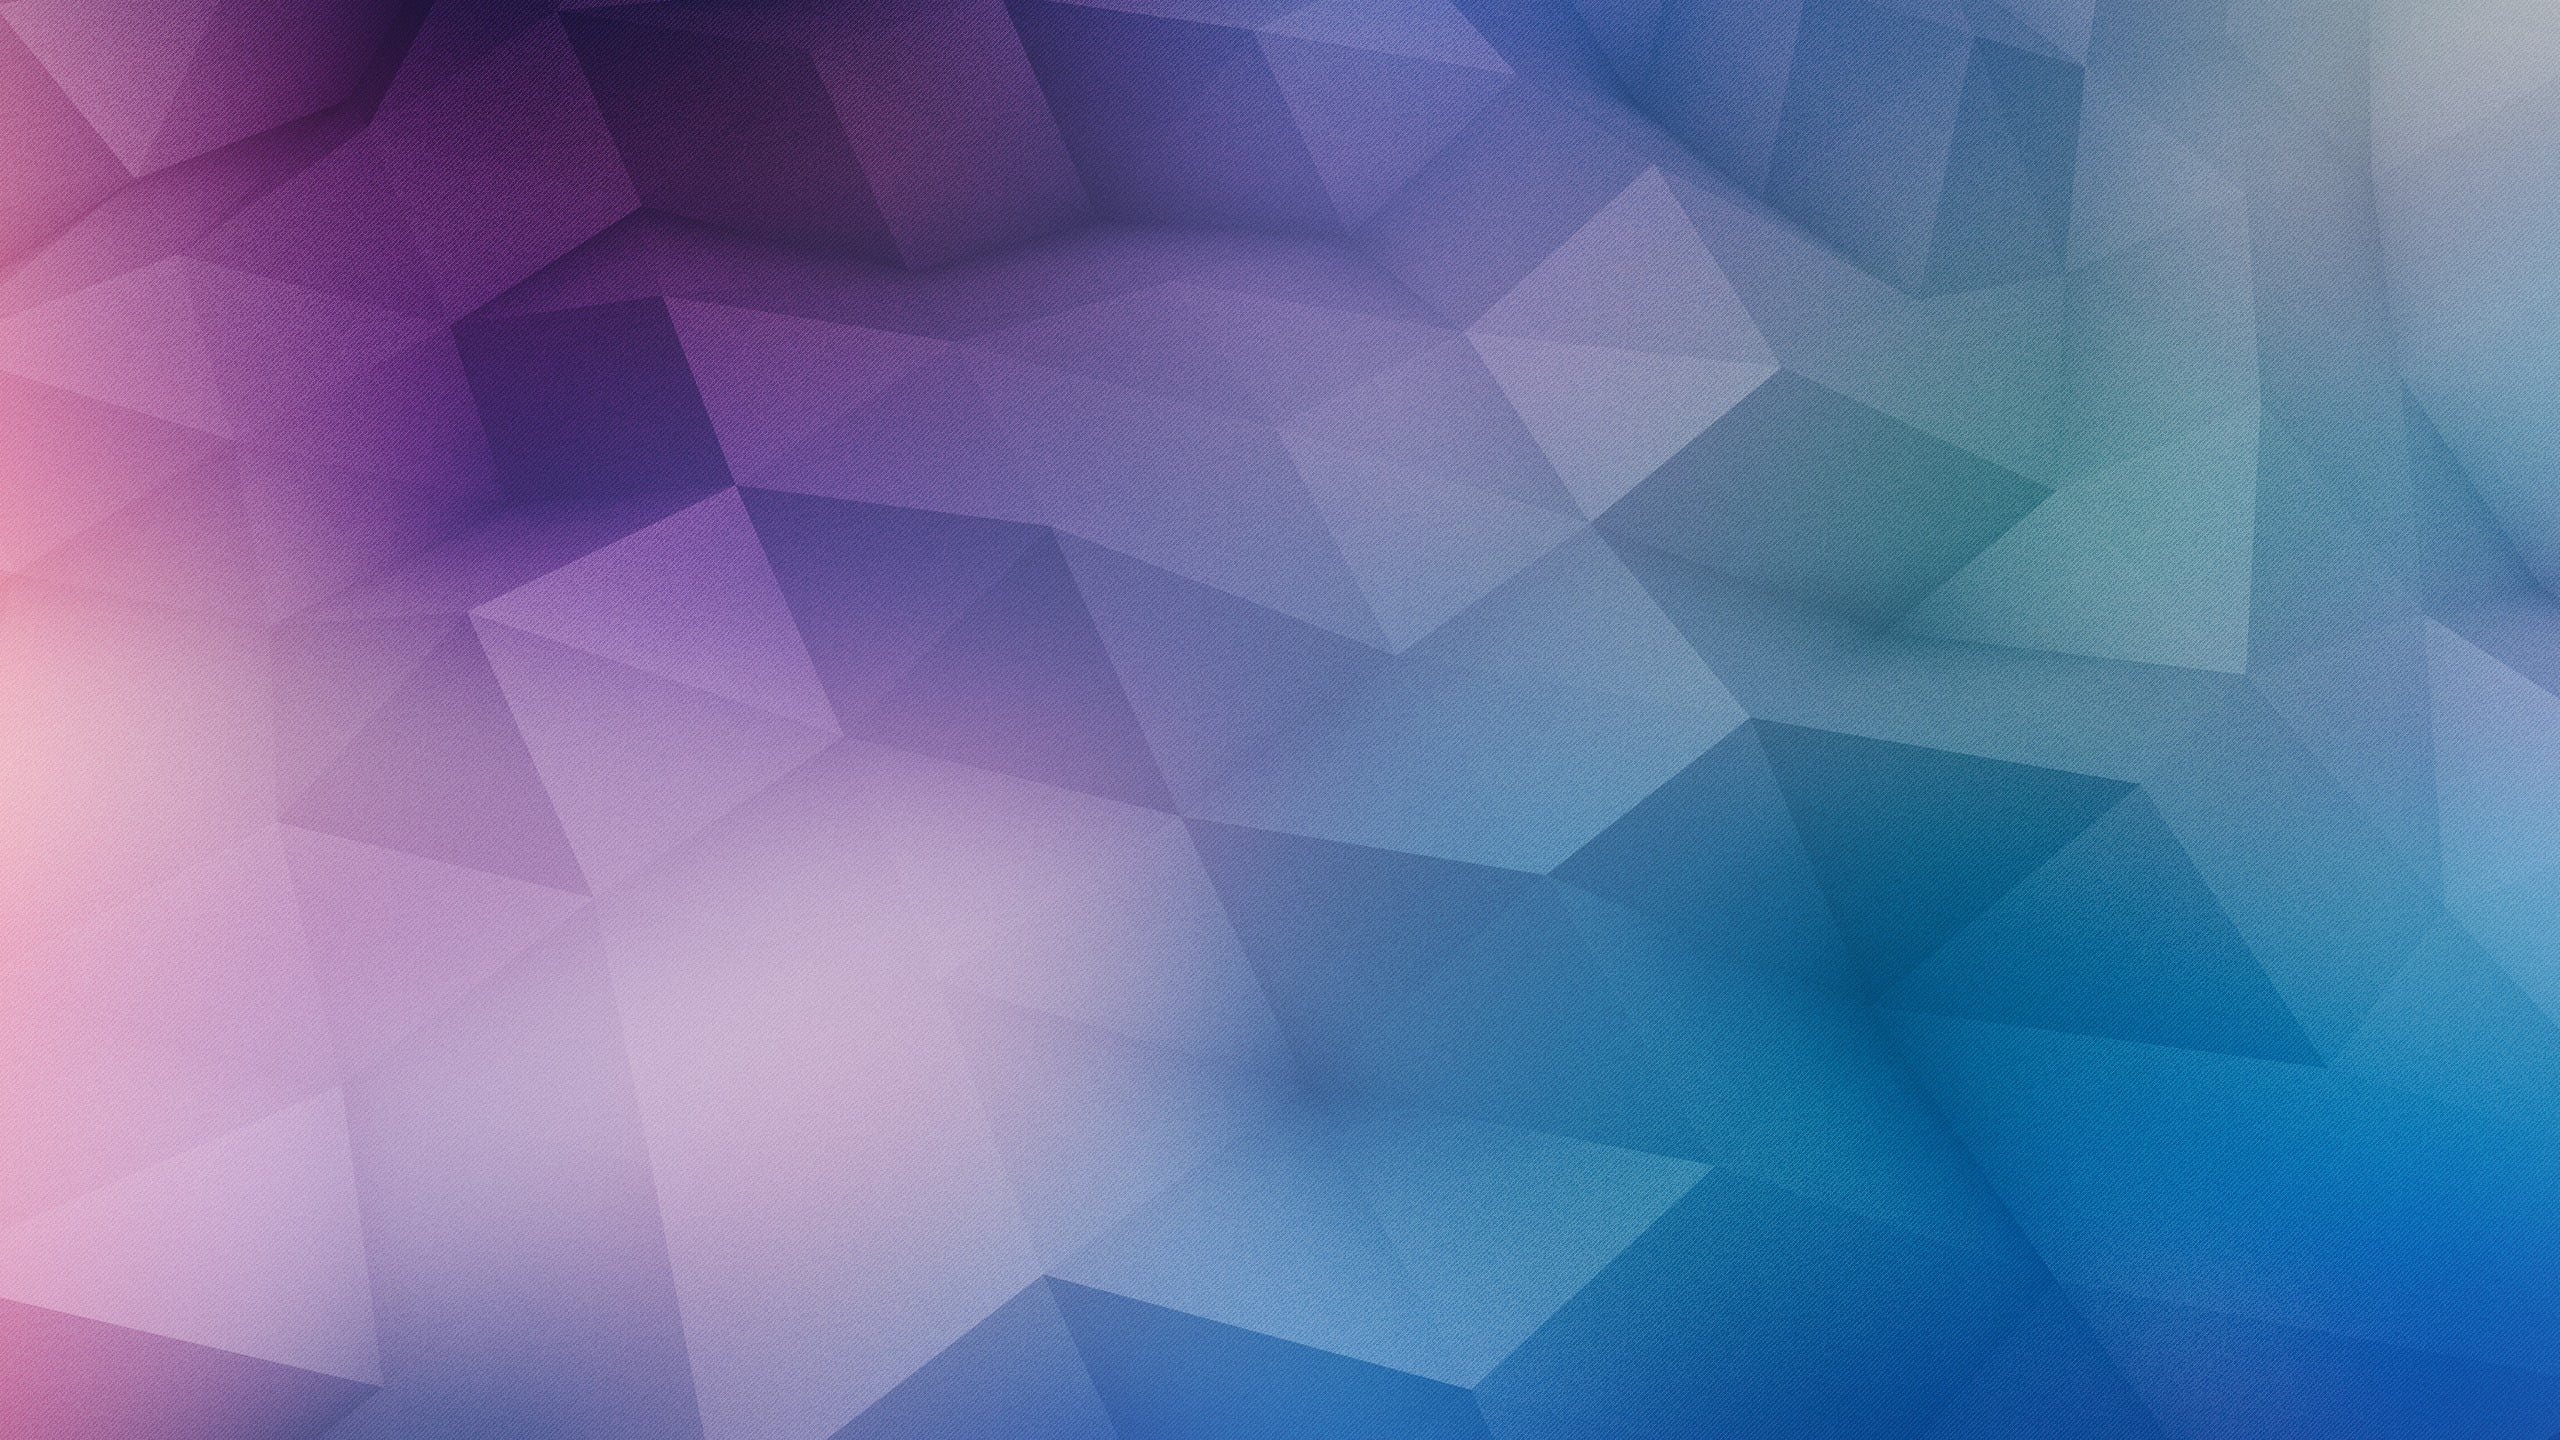 abstract, Kyle Gray, low poly, texture, pattern, shape, backgrounds